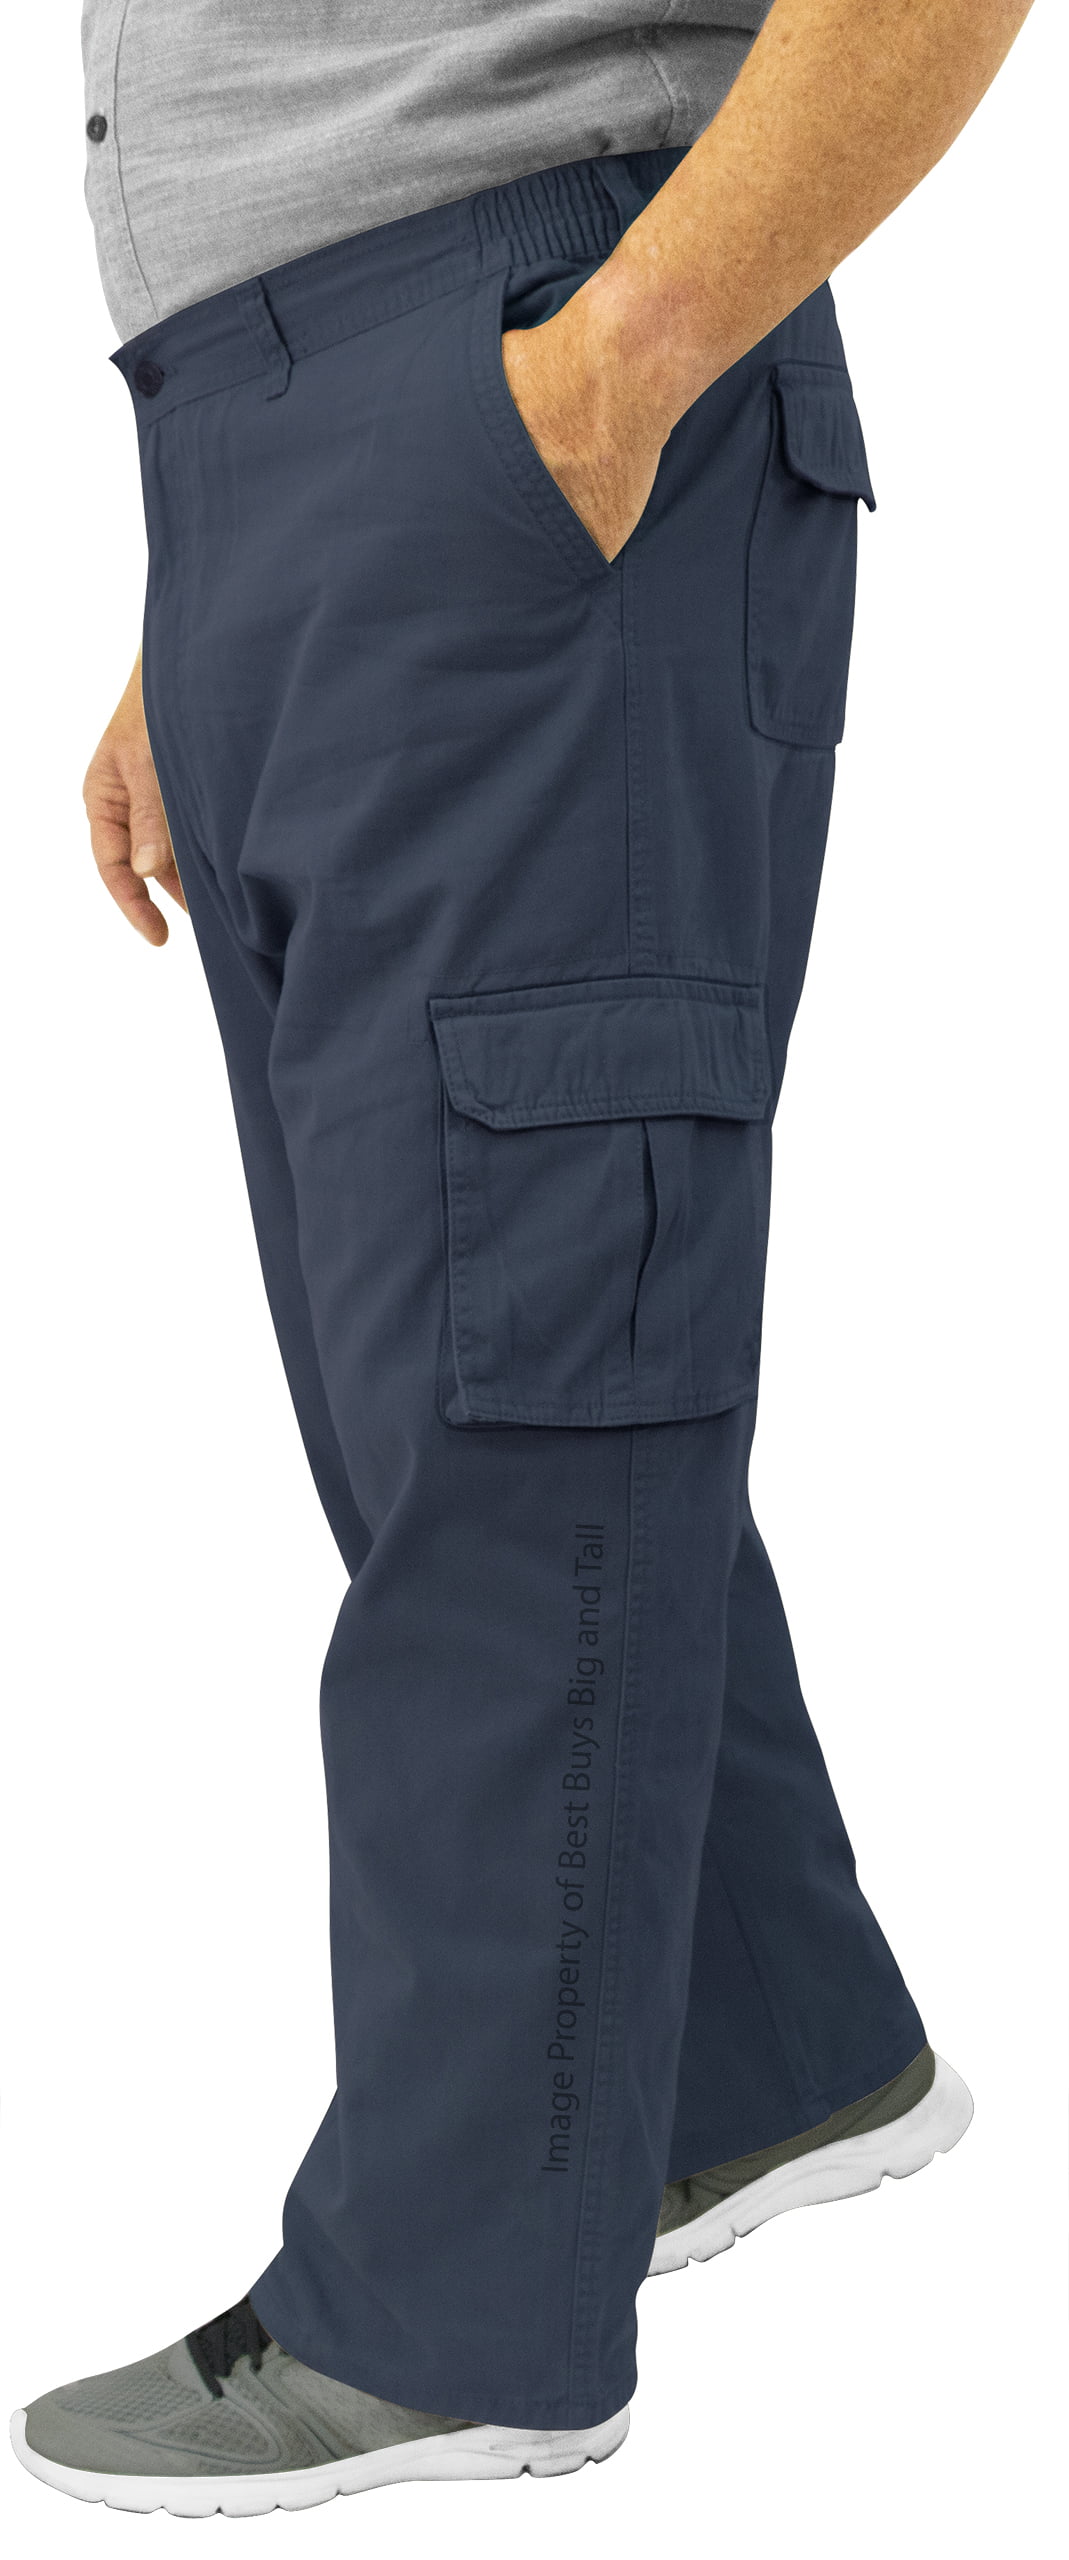 Big & Tall Men's Casual Cargo Pants with Side Elastic by Full Blue Sizes 42-68 